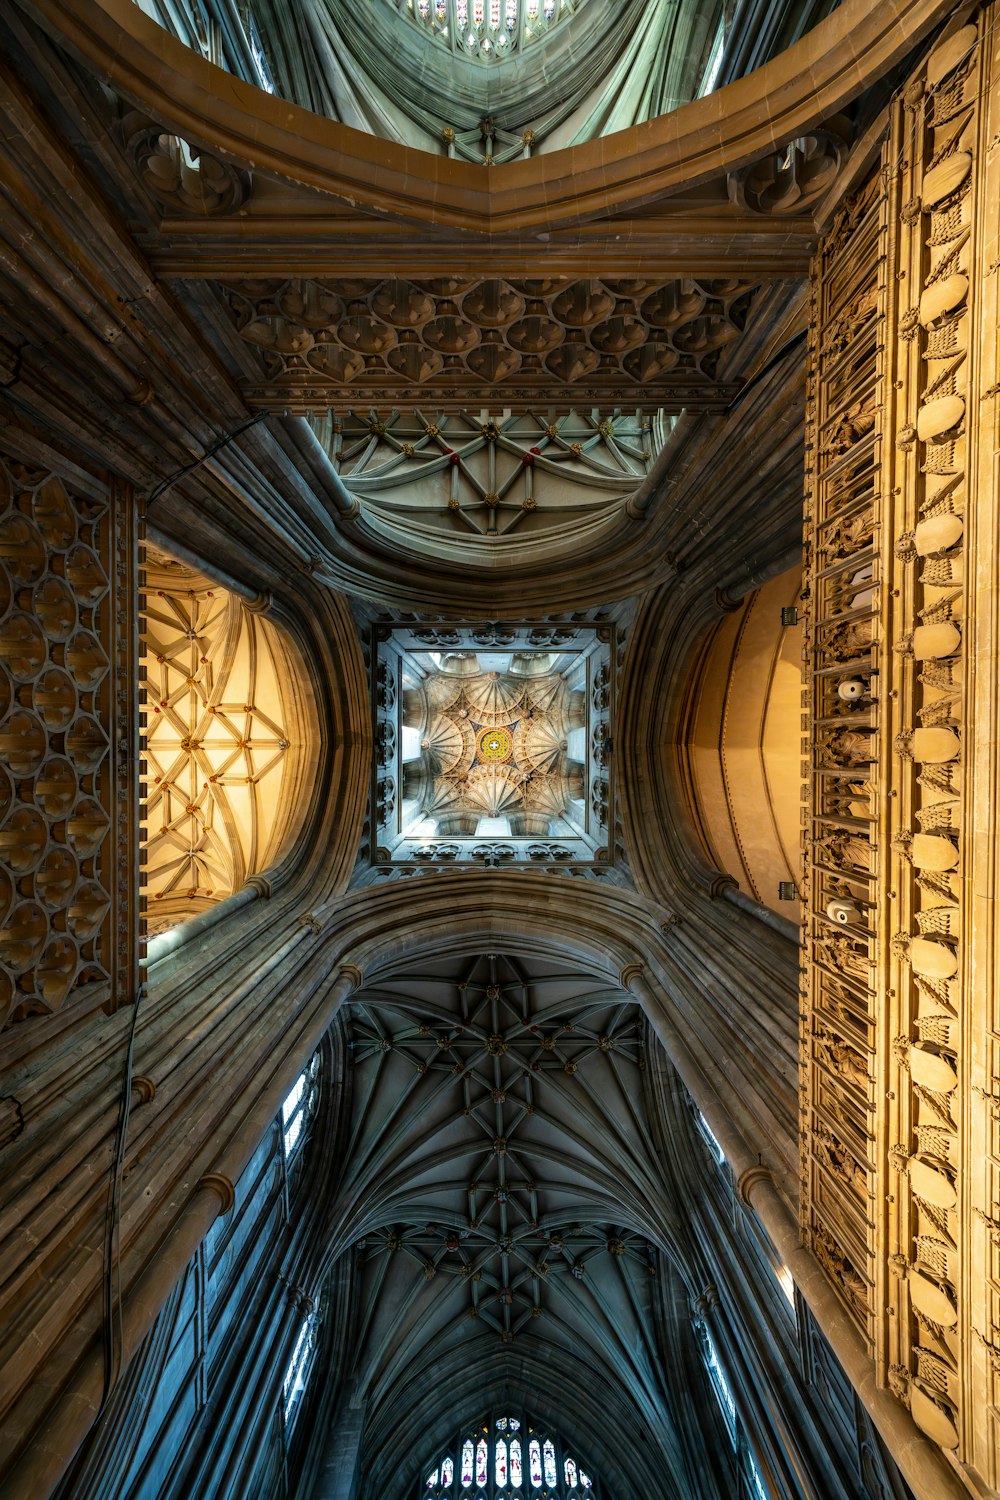 the ceiling of a cathedral with intricate carvings